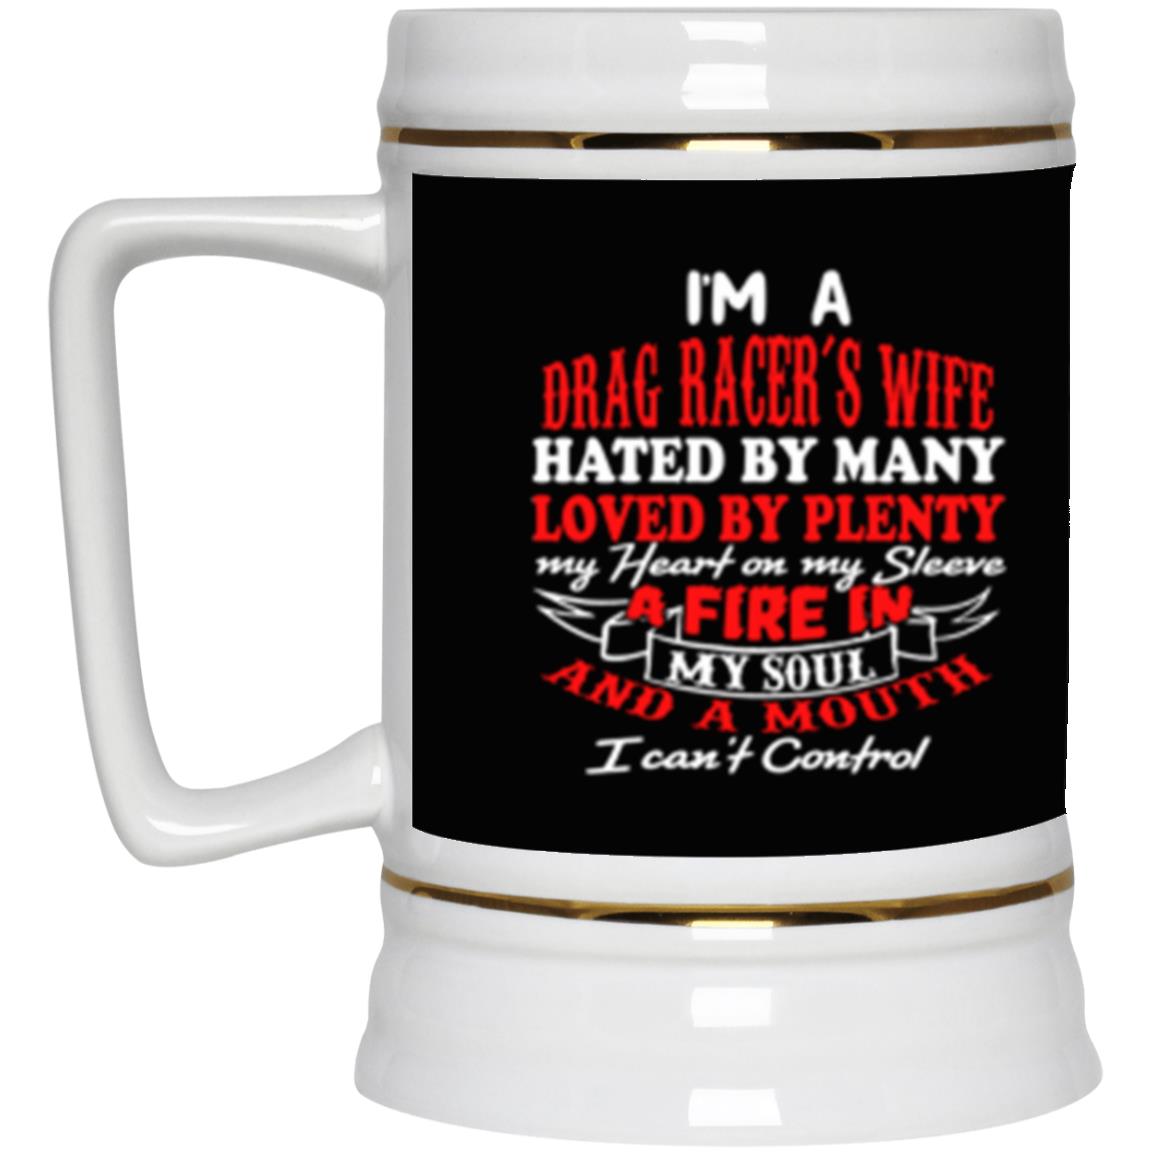 I'm A Drag Racer's Wife Hated By Many Loved By Plenty Beer Stein 22oz.